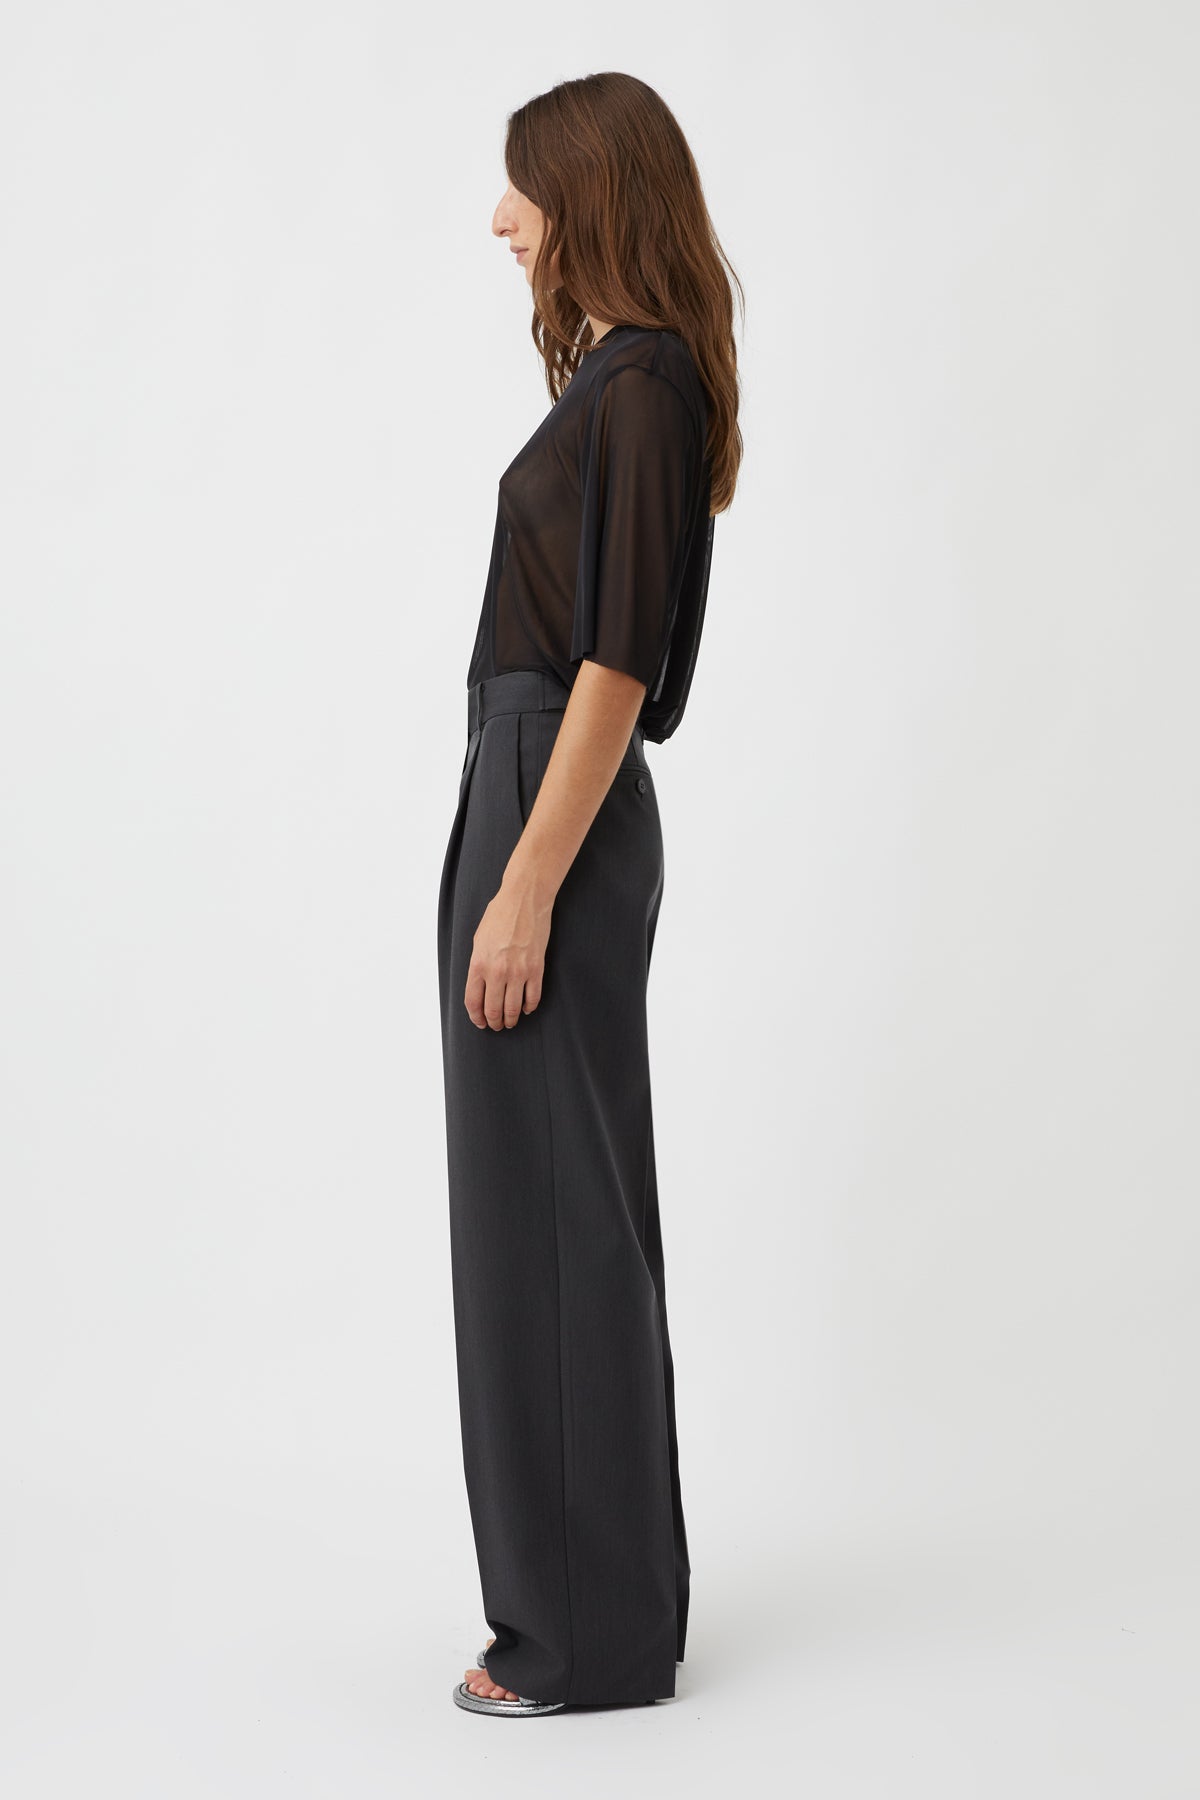 Camilla and Marc | Danica Tailored Pant - Steel